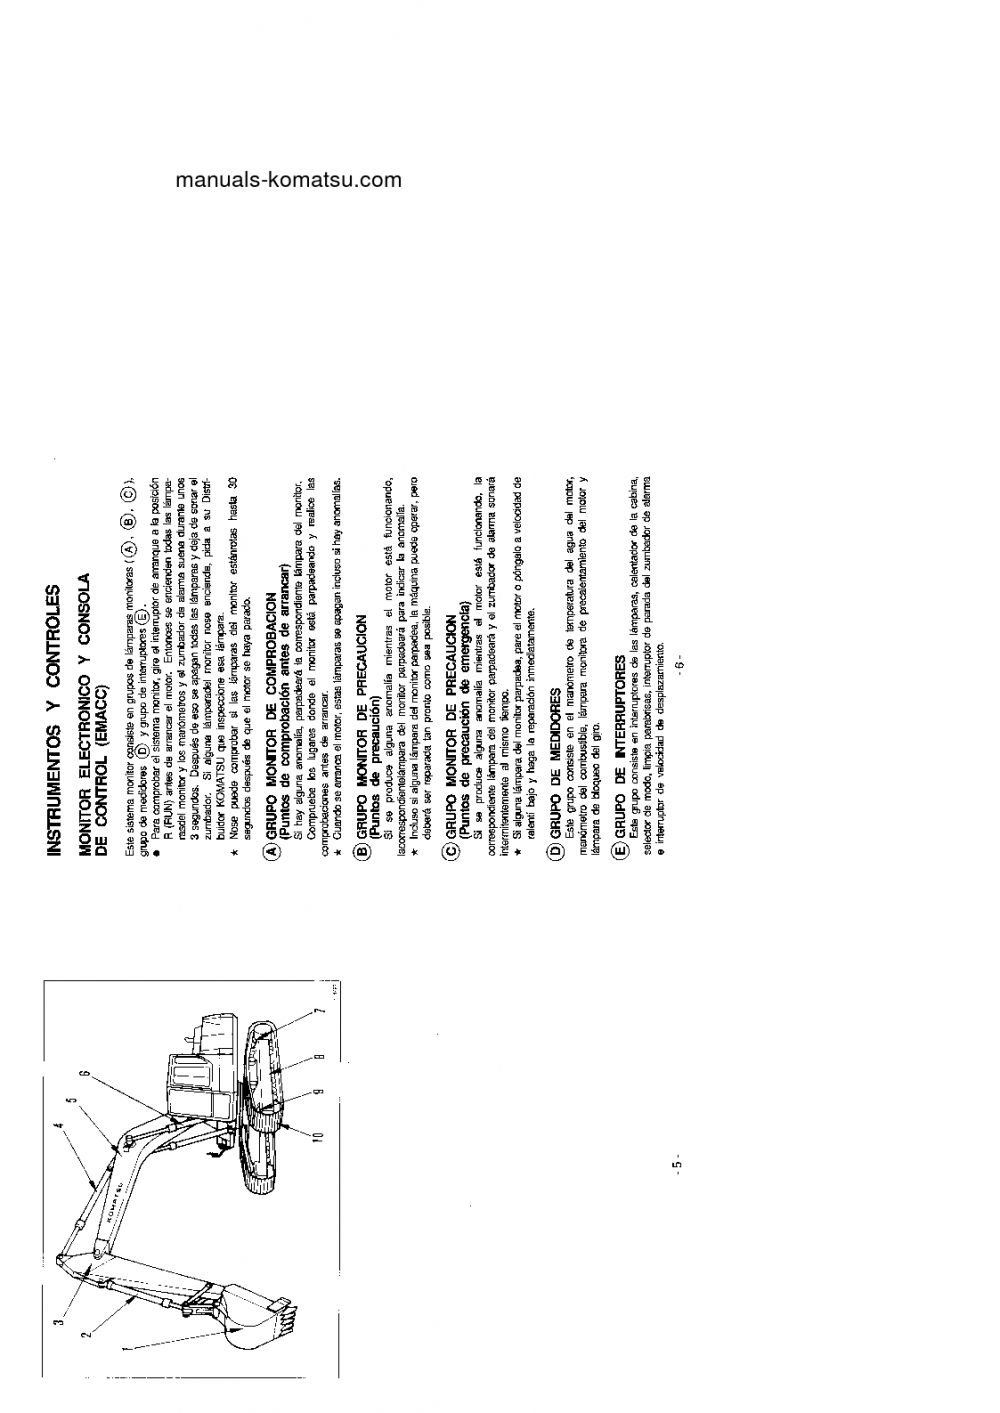 Protected: PC210-5(GBR)-K S/N K20001-UP Operation manual (Spanish)